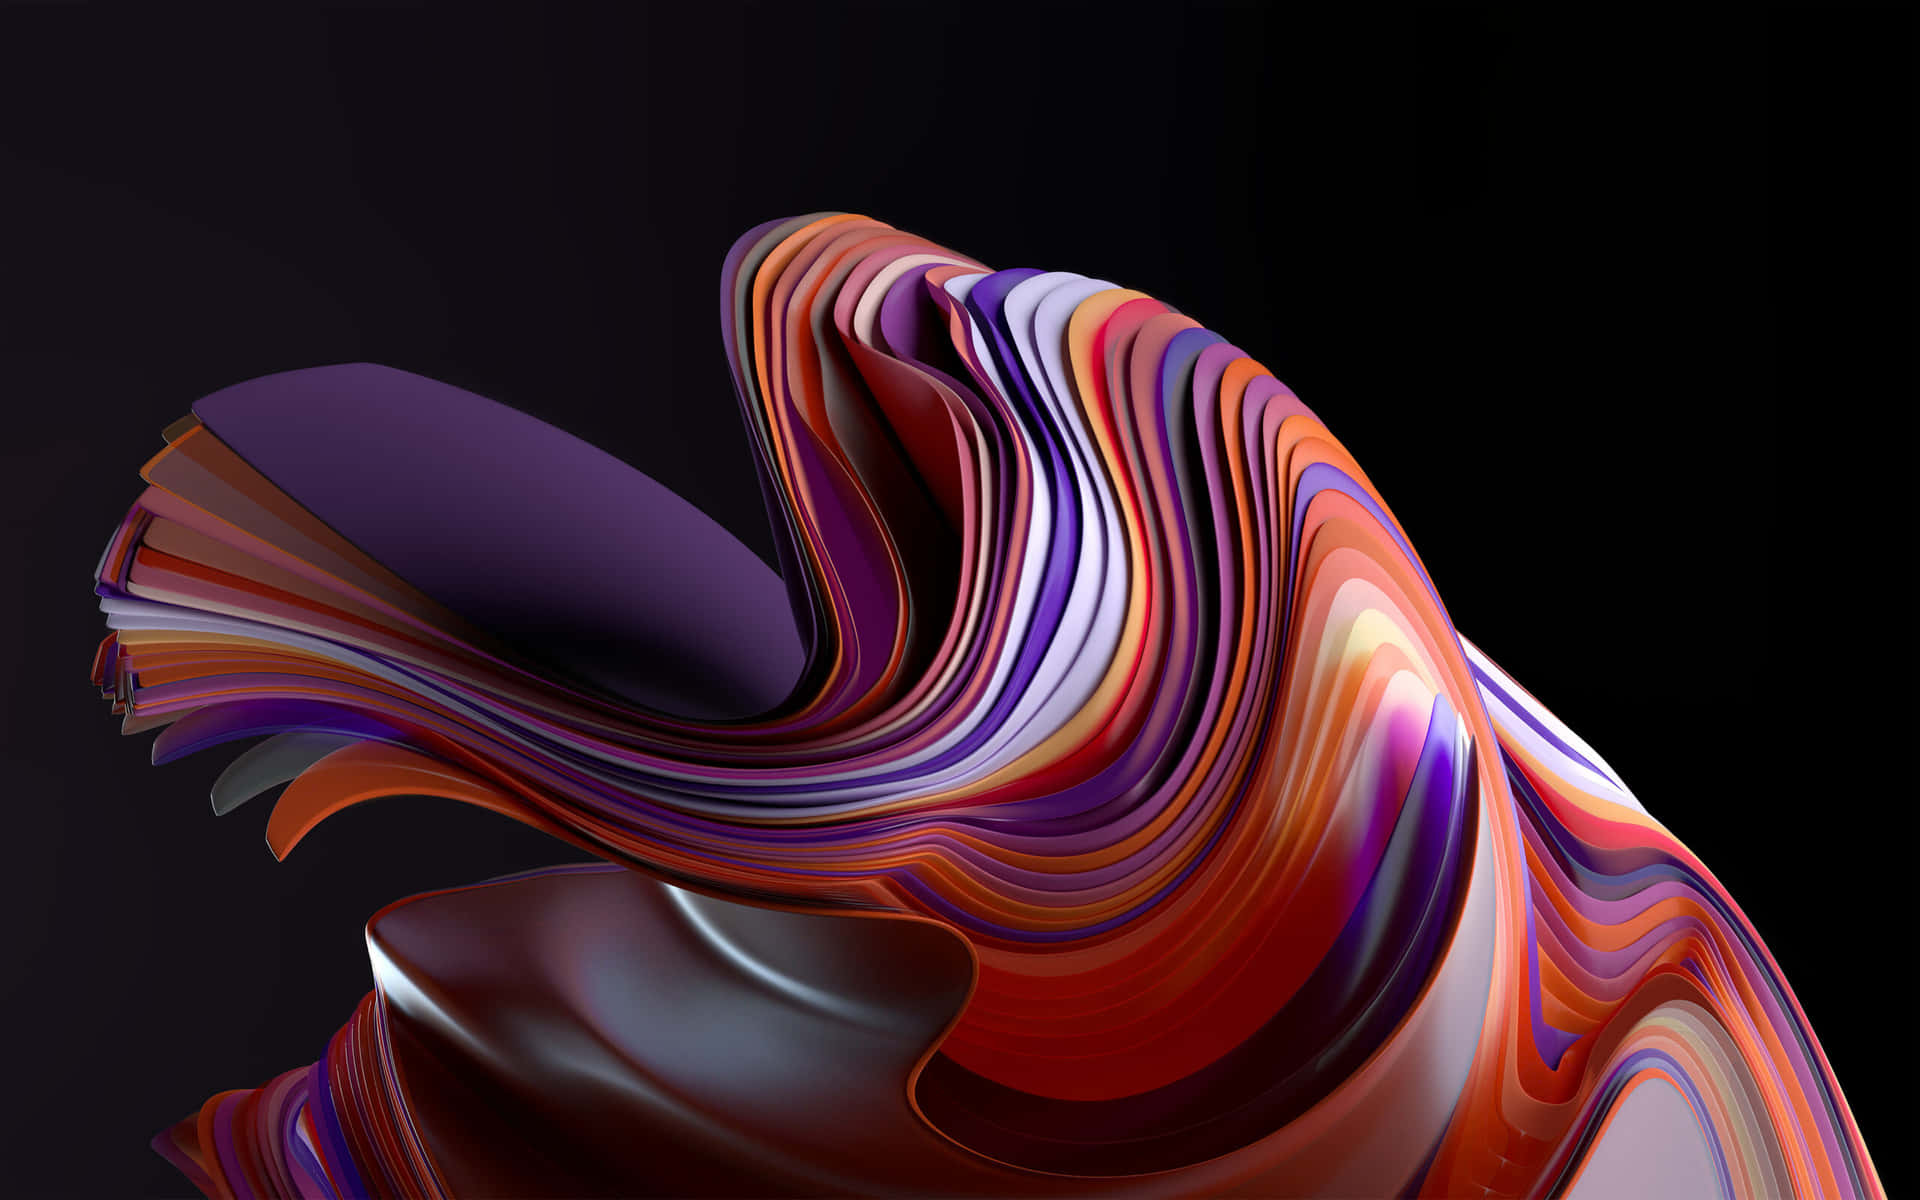 A Colorful Abstract Design With Swirls Background